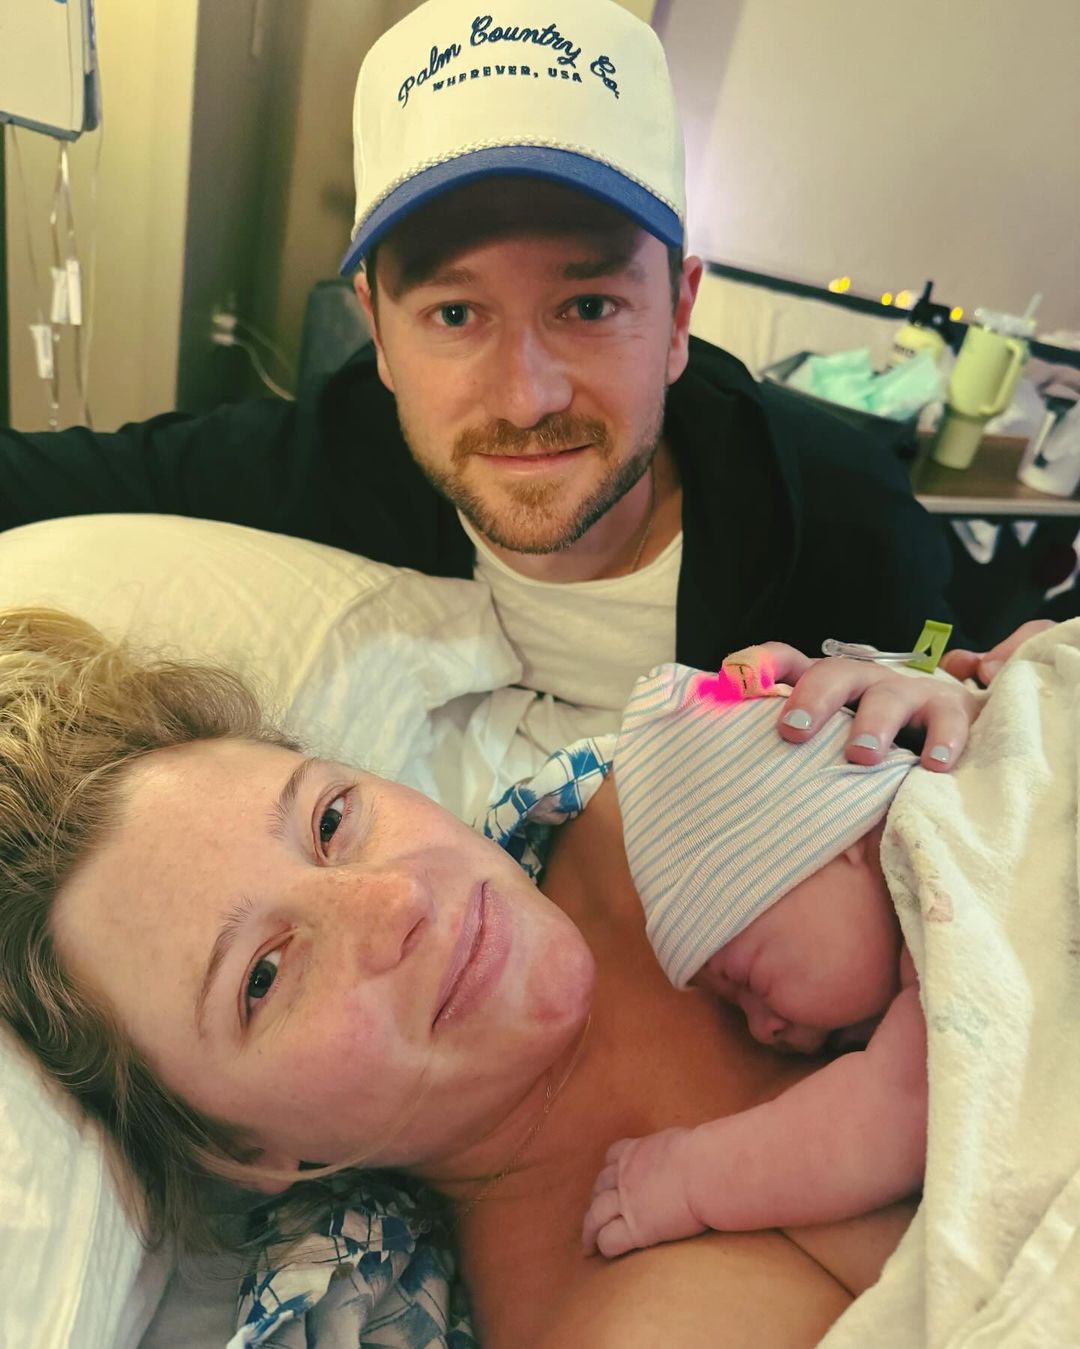 Adam Doleac and his wife, MacKinnon Doleac welcomed their first child.